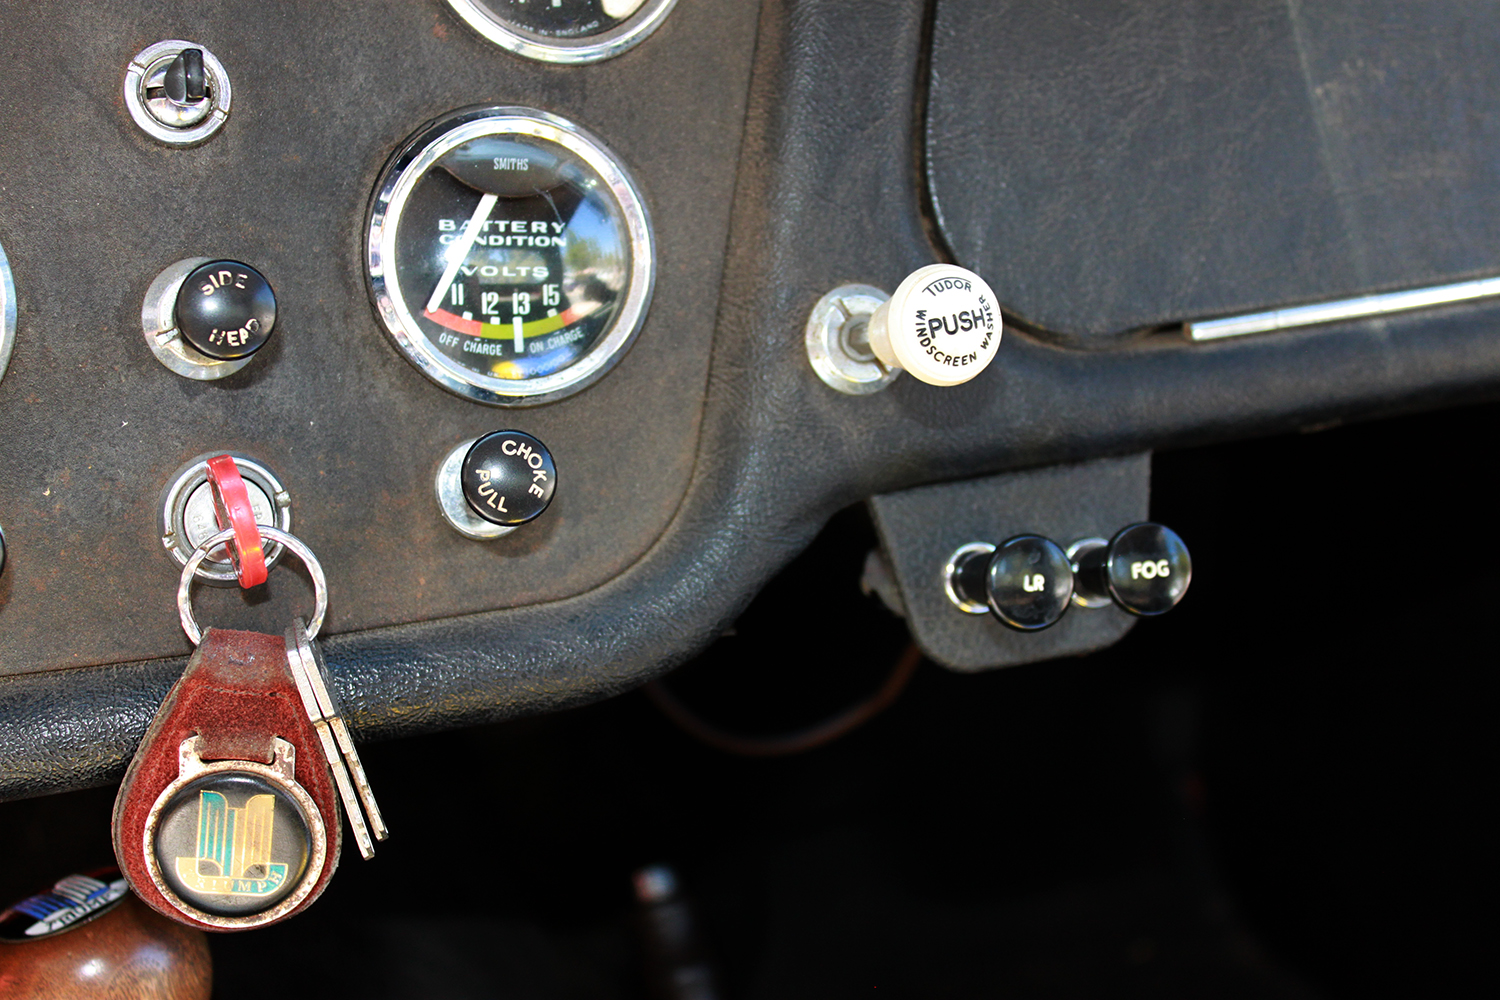 Lucas PS7 switch panel mounted in my Triumph TR3